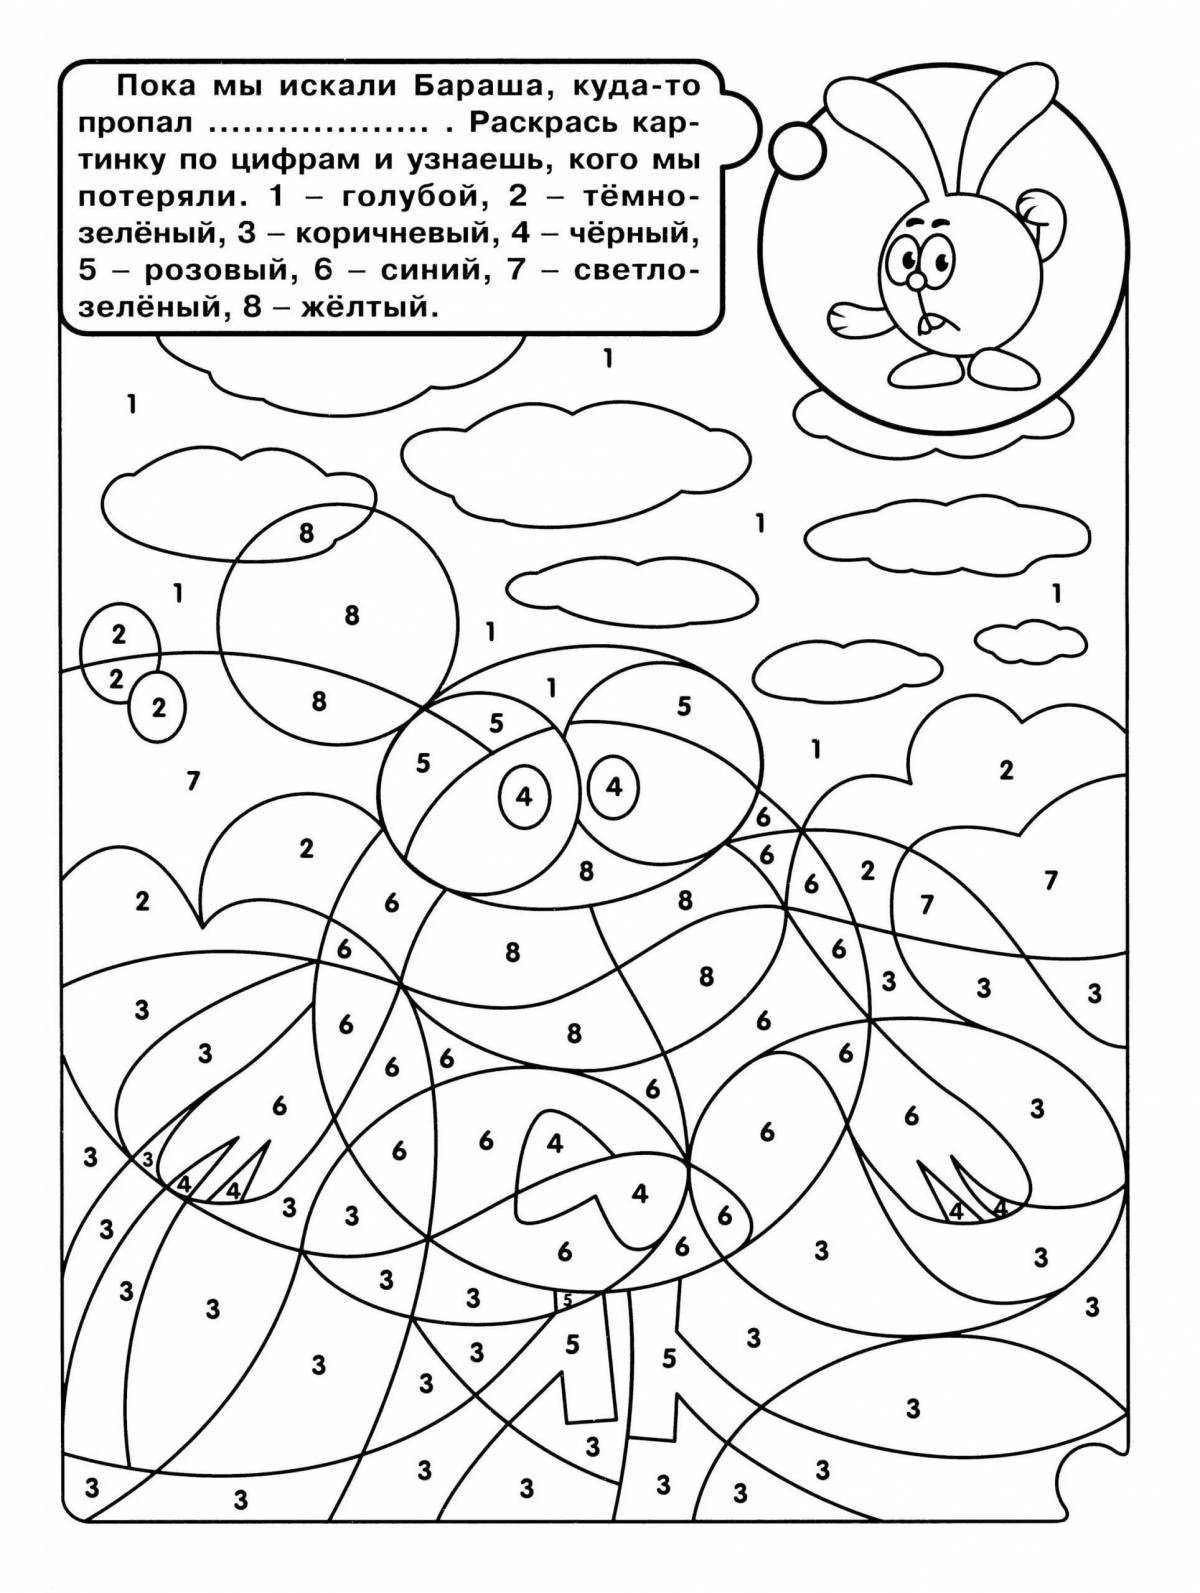 Spell coloring book for 7-8 year olds